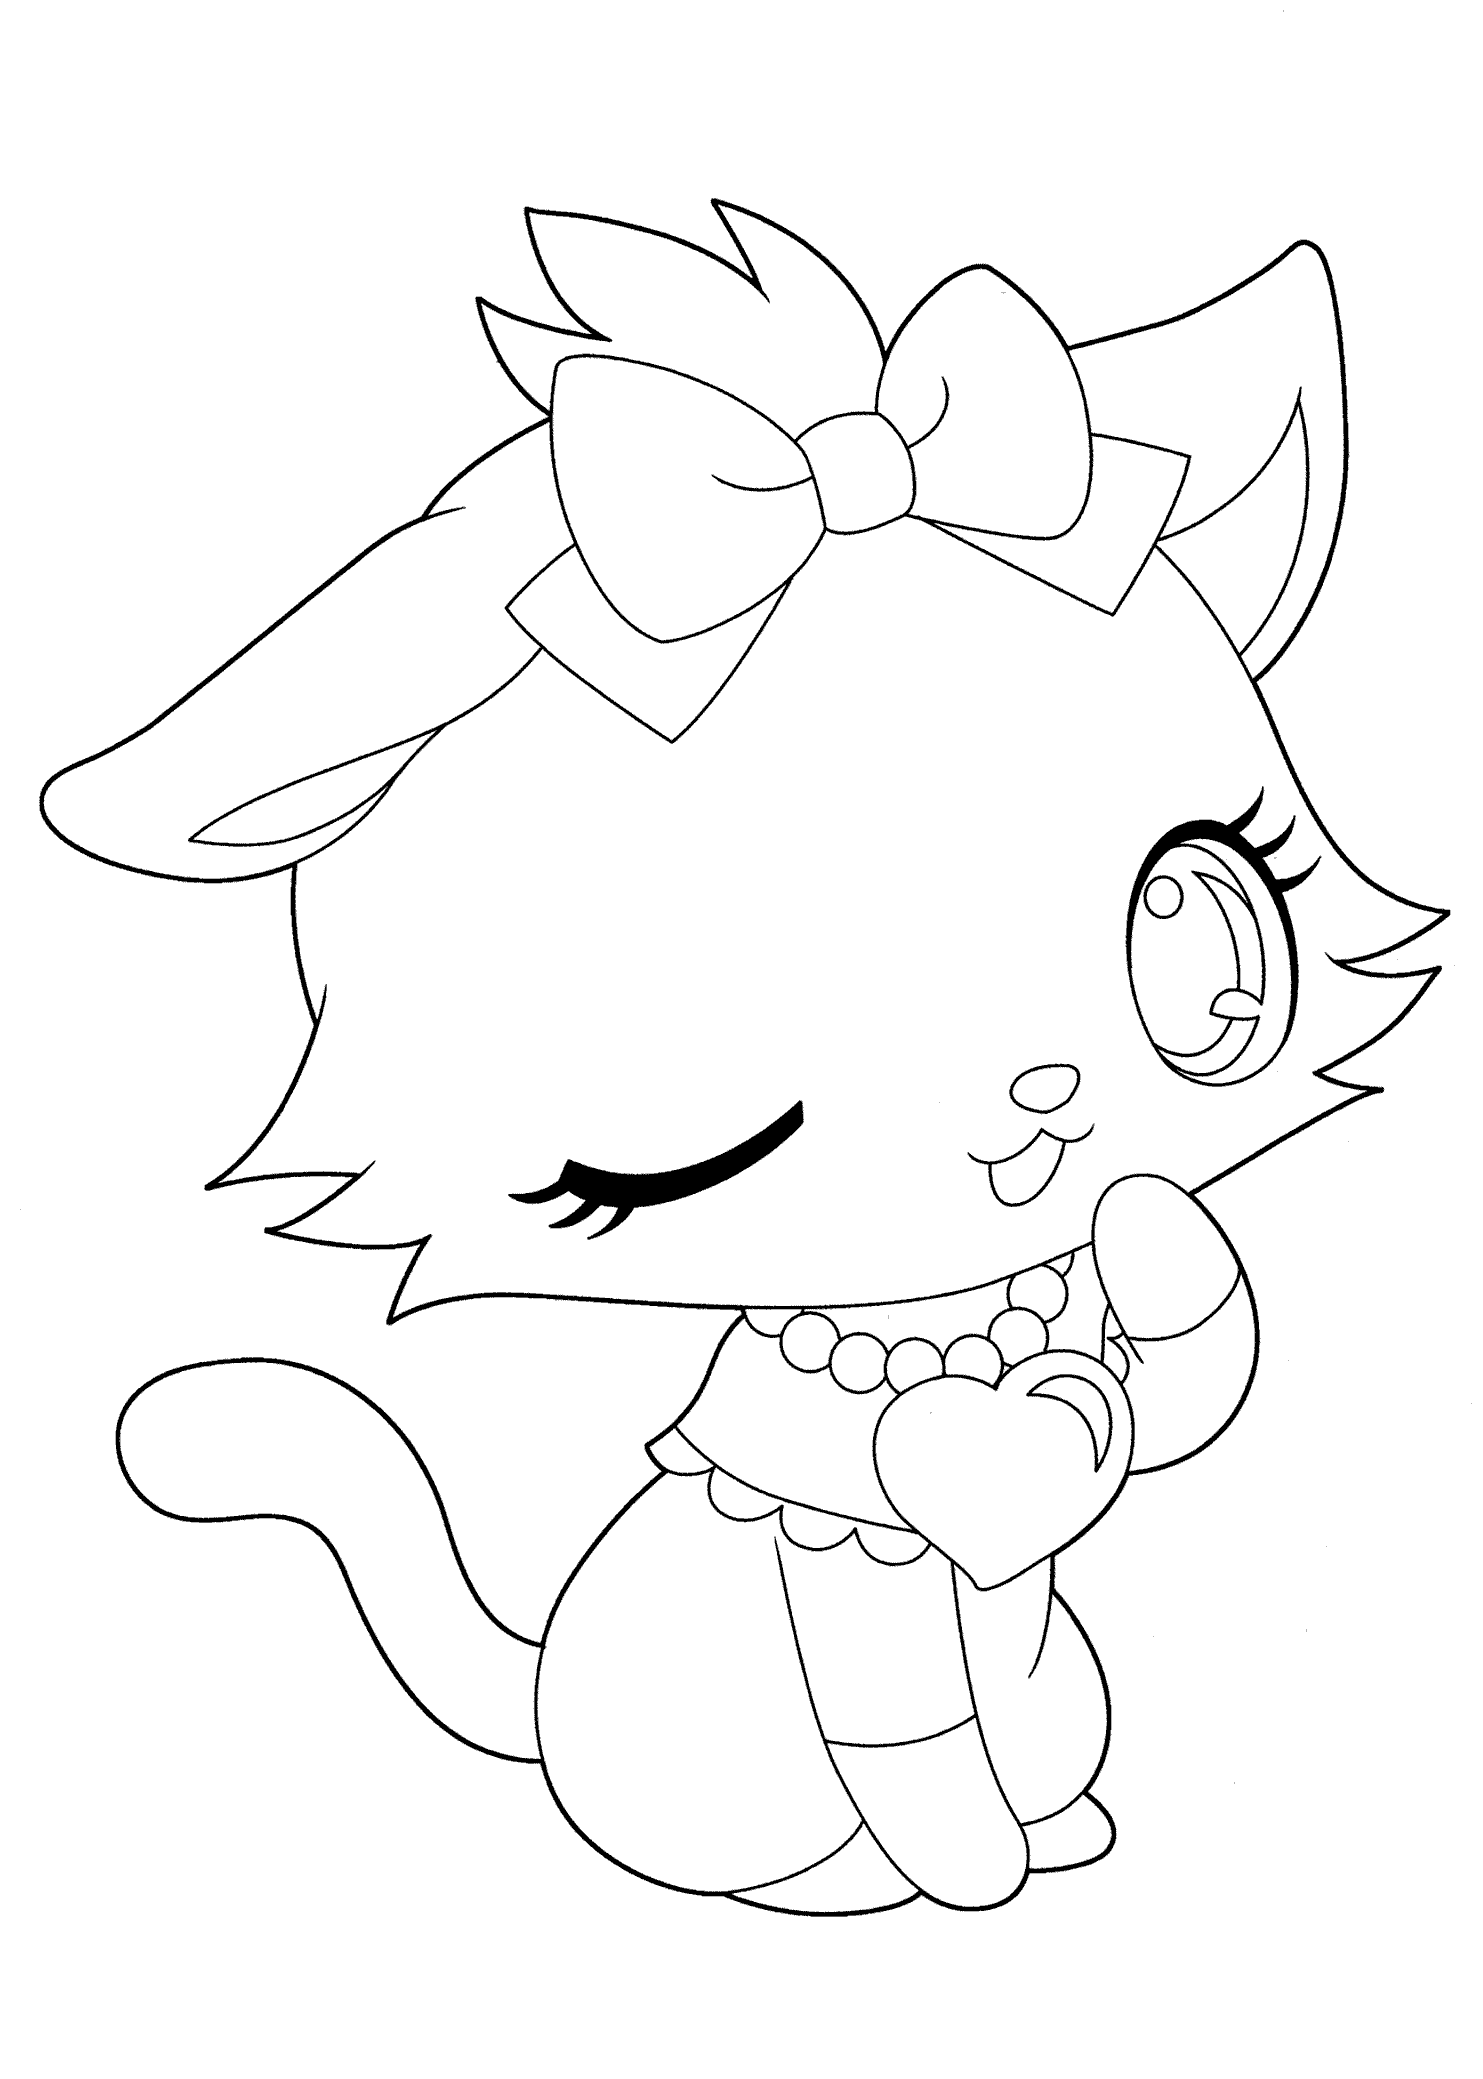 Manga Cat Coloring Pages - High Quality Coloring Pages